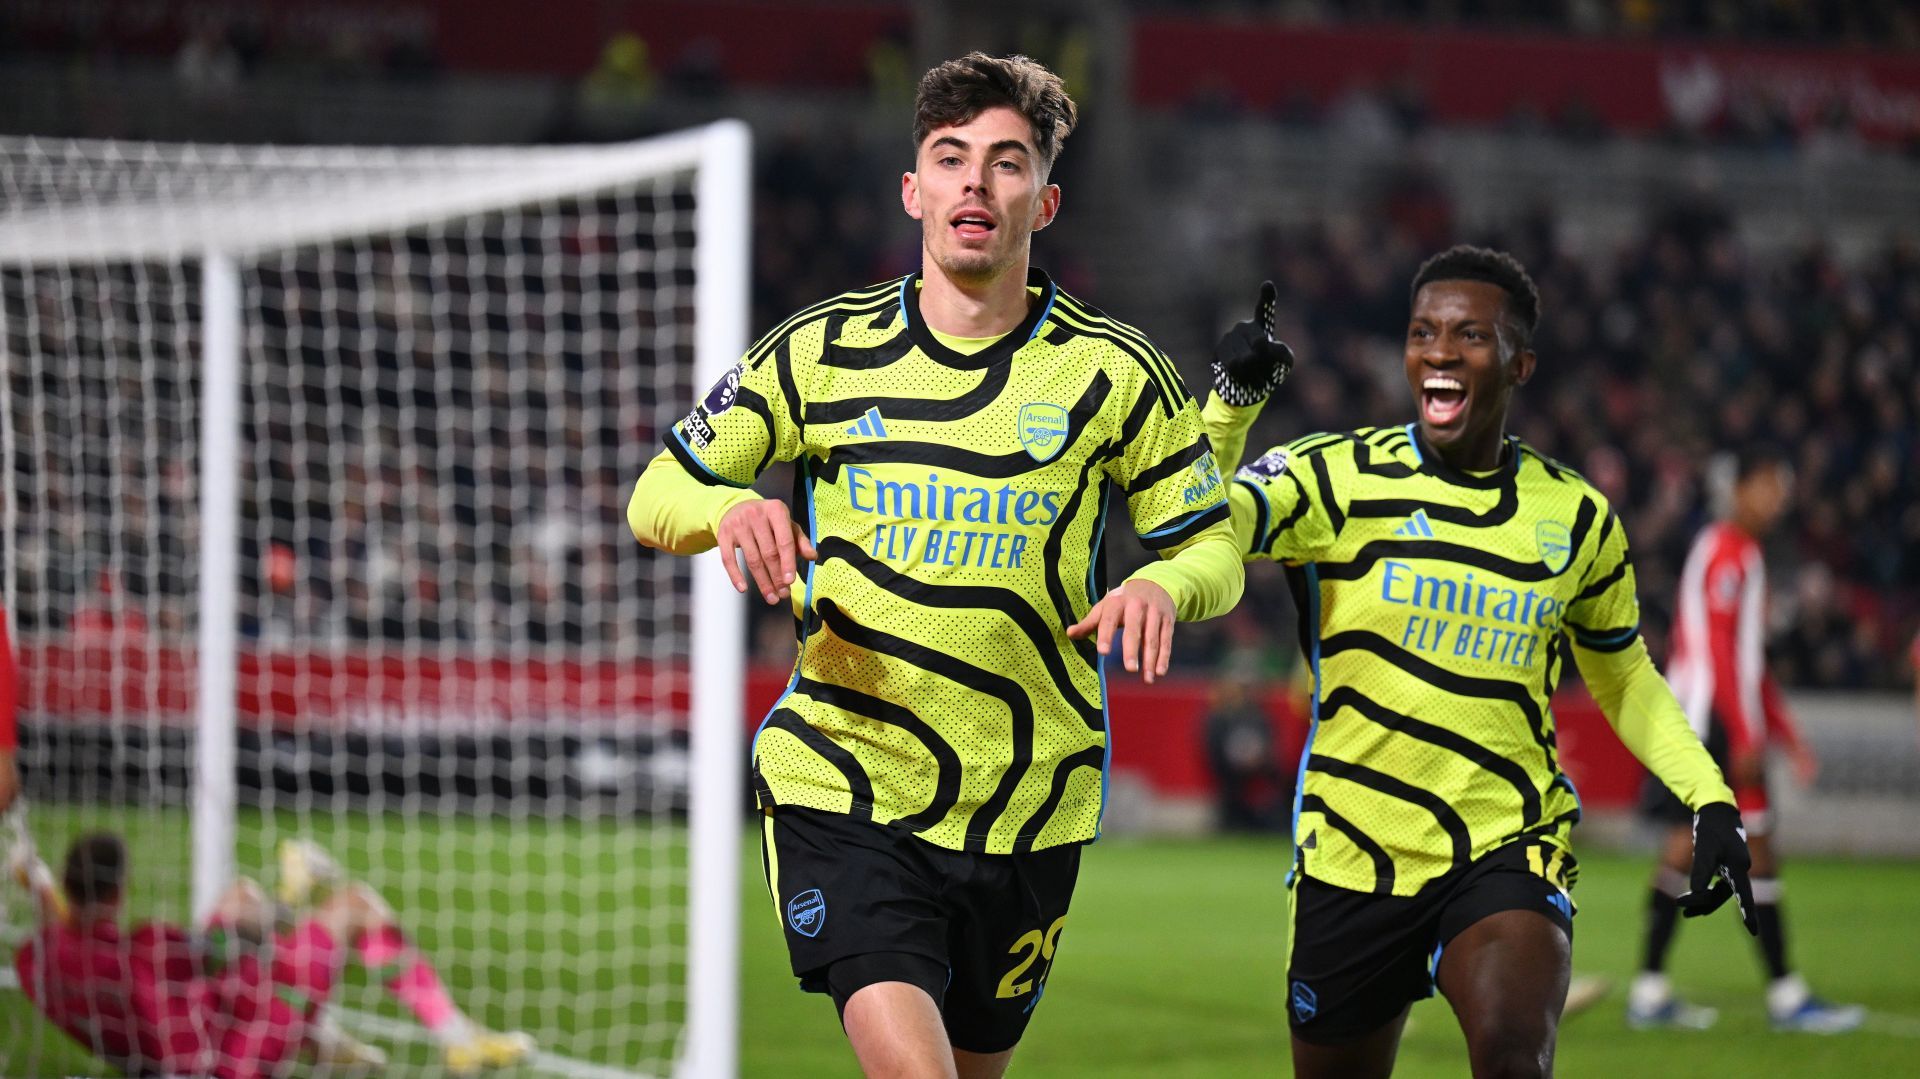 Kai Havertz netted a vital winner that took Arsenal to the top of the league.